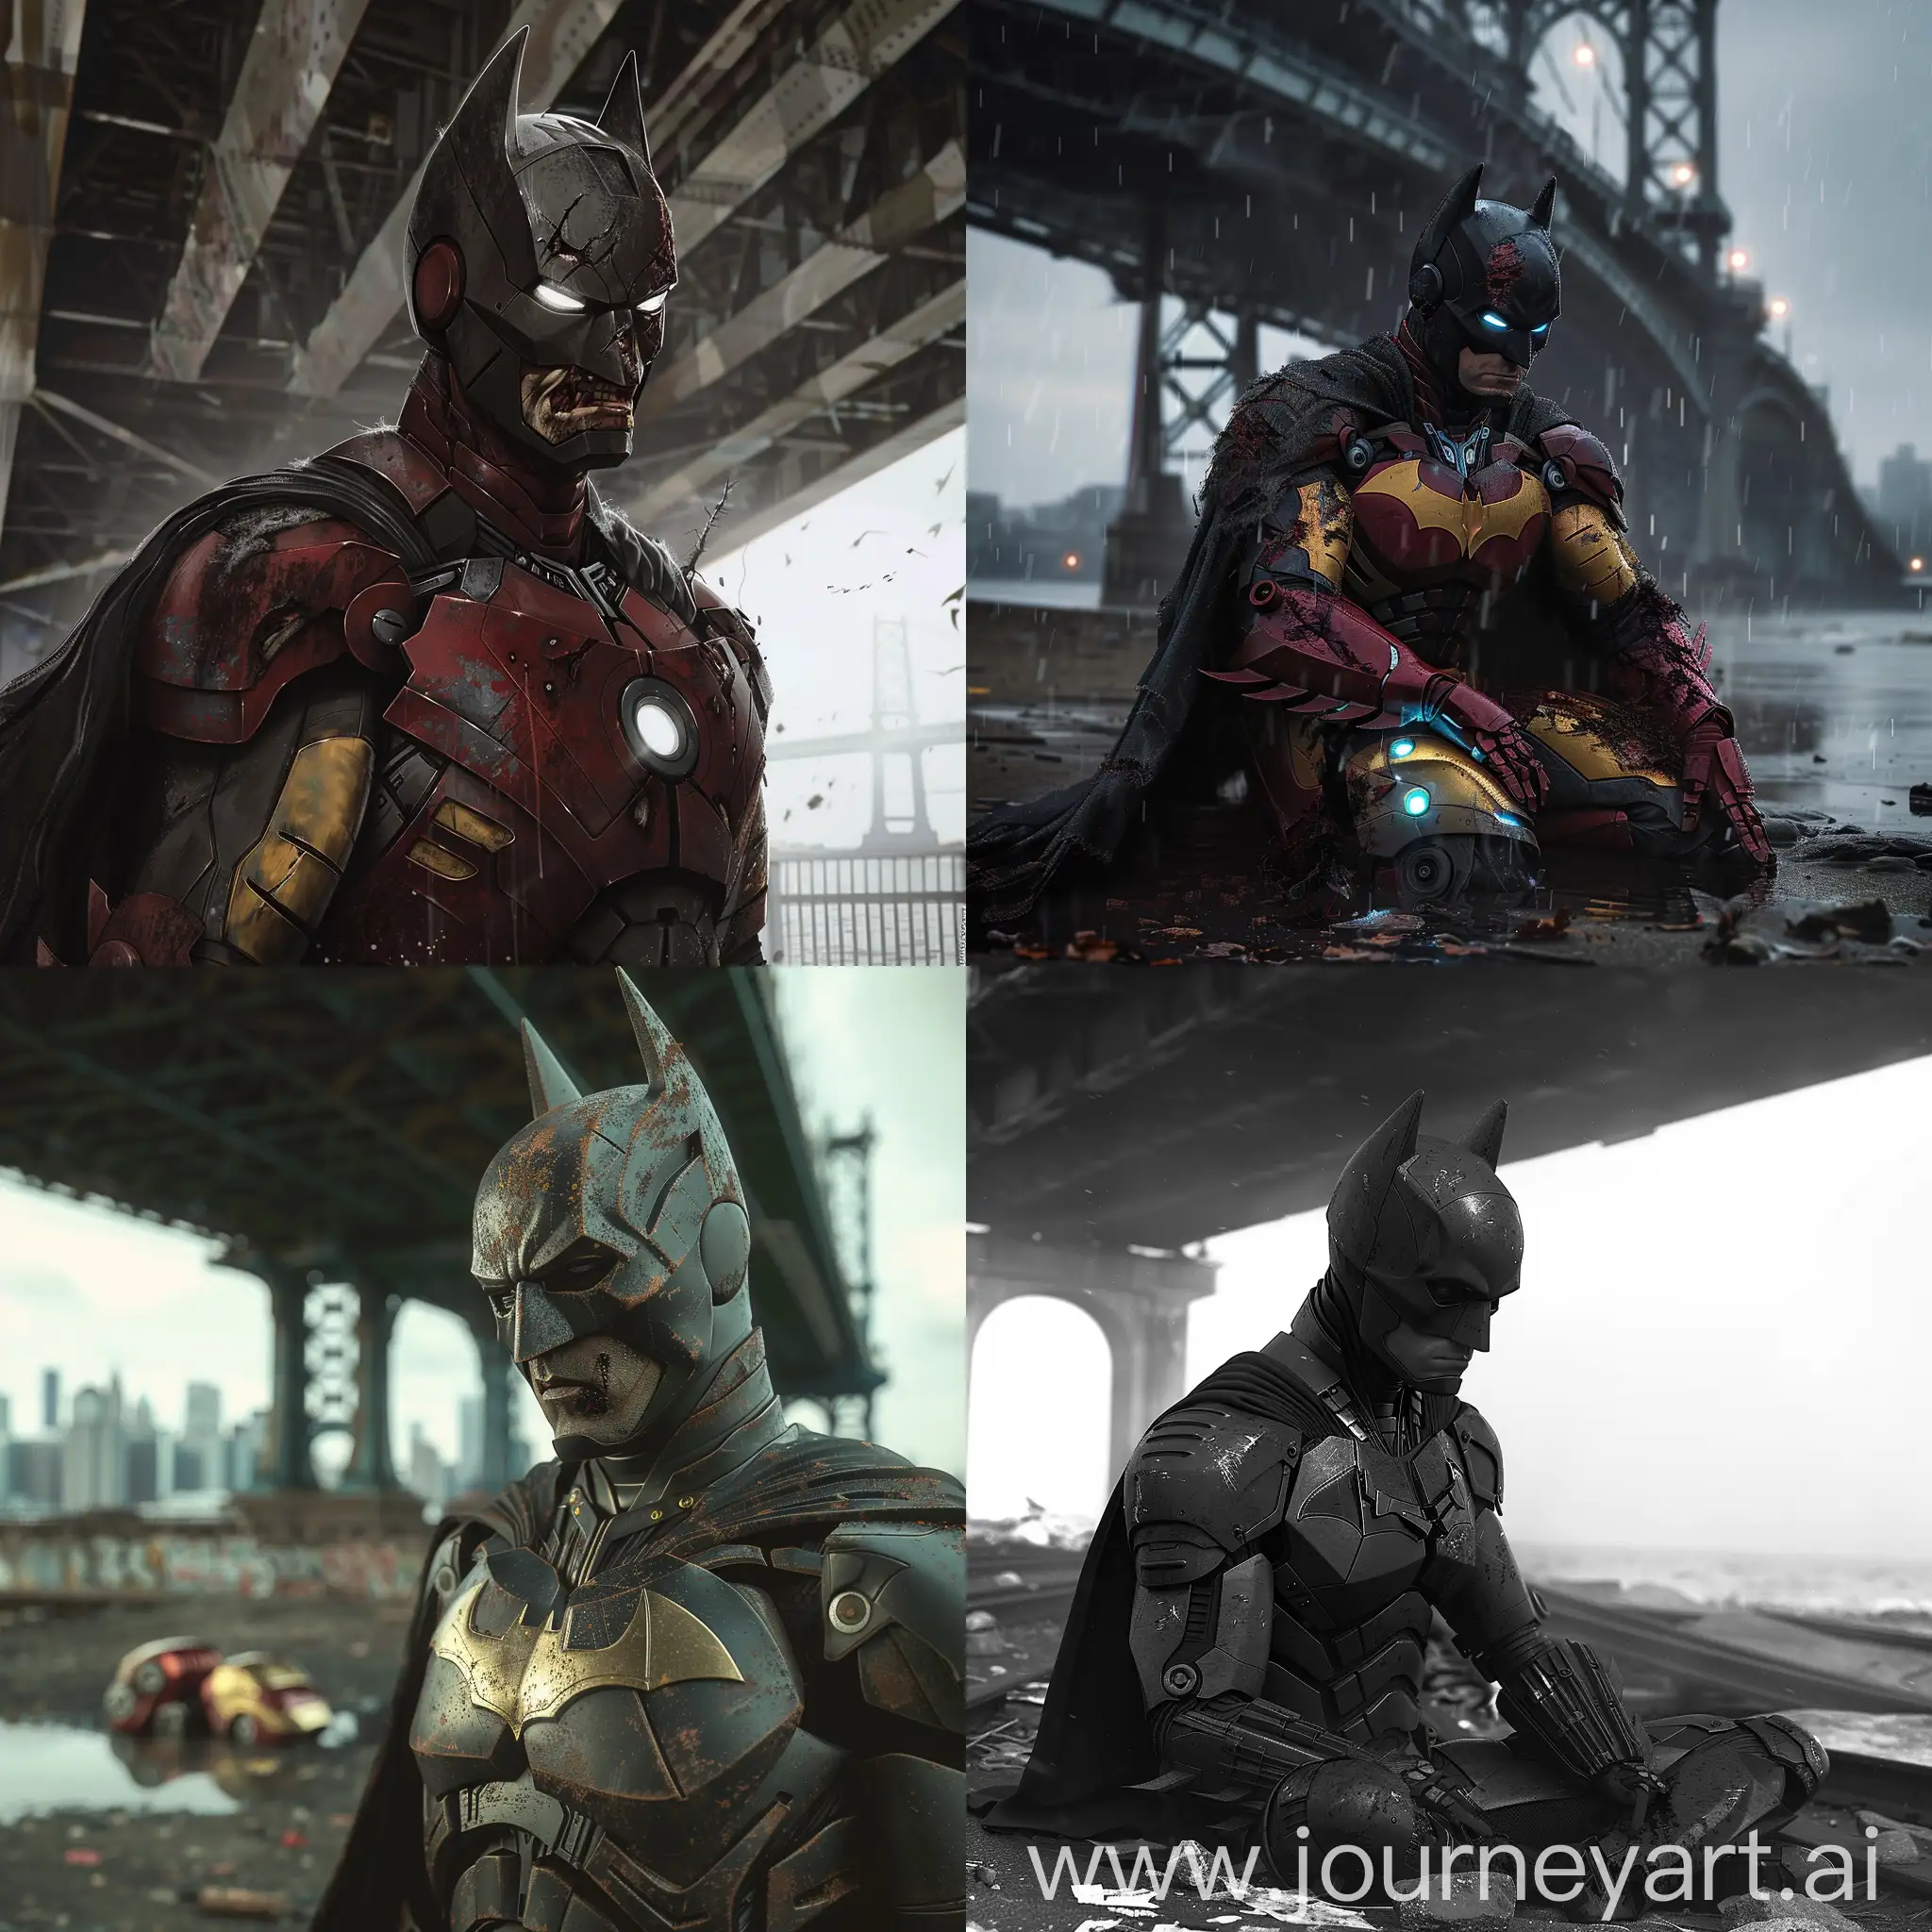 Create for me the poor Batman under the bridge wearing his vigilante outfit but it is torn and with the iron man helmet